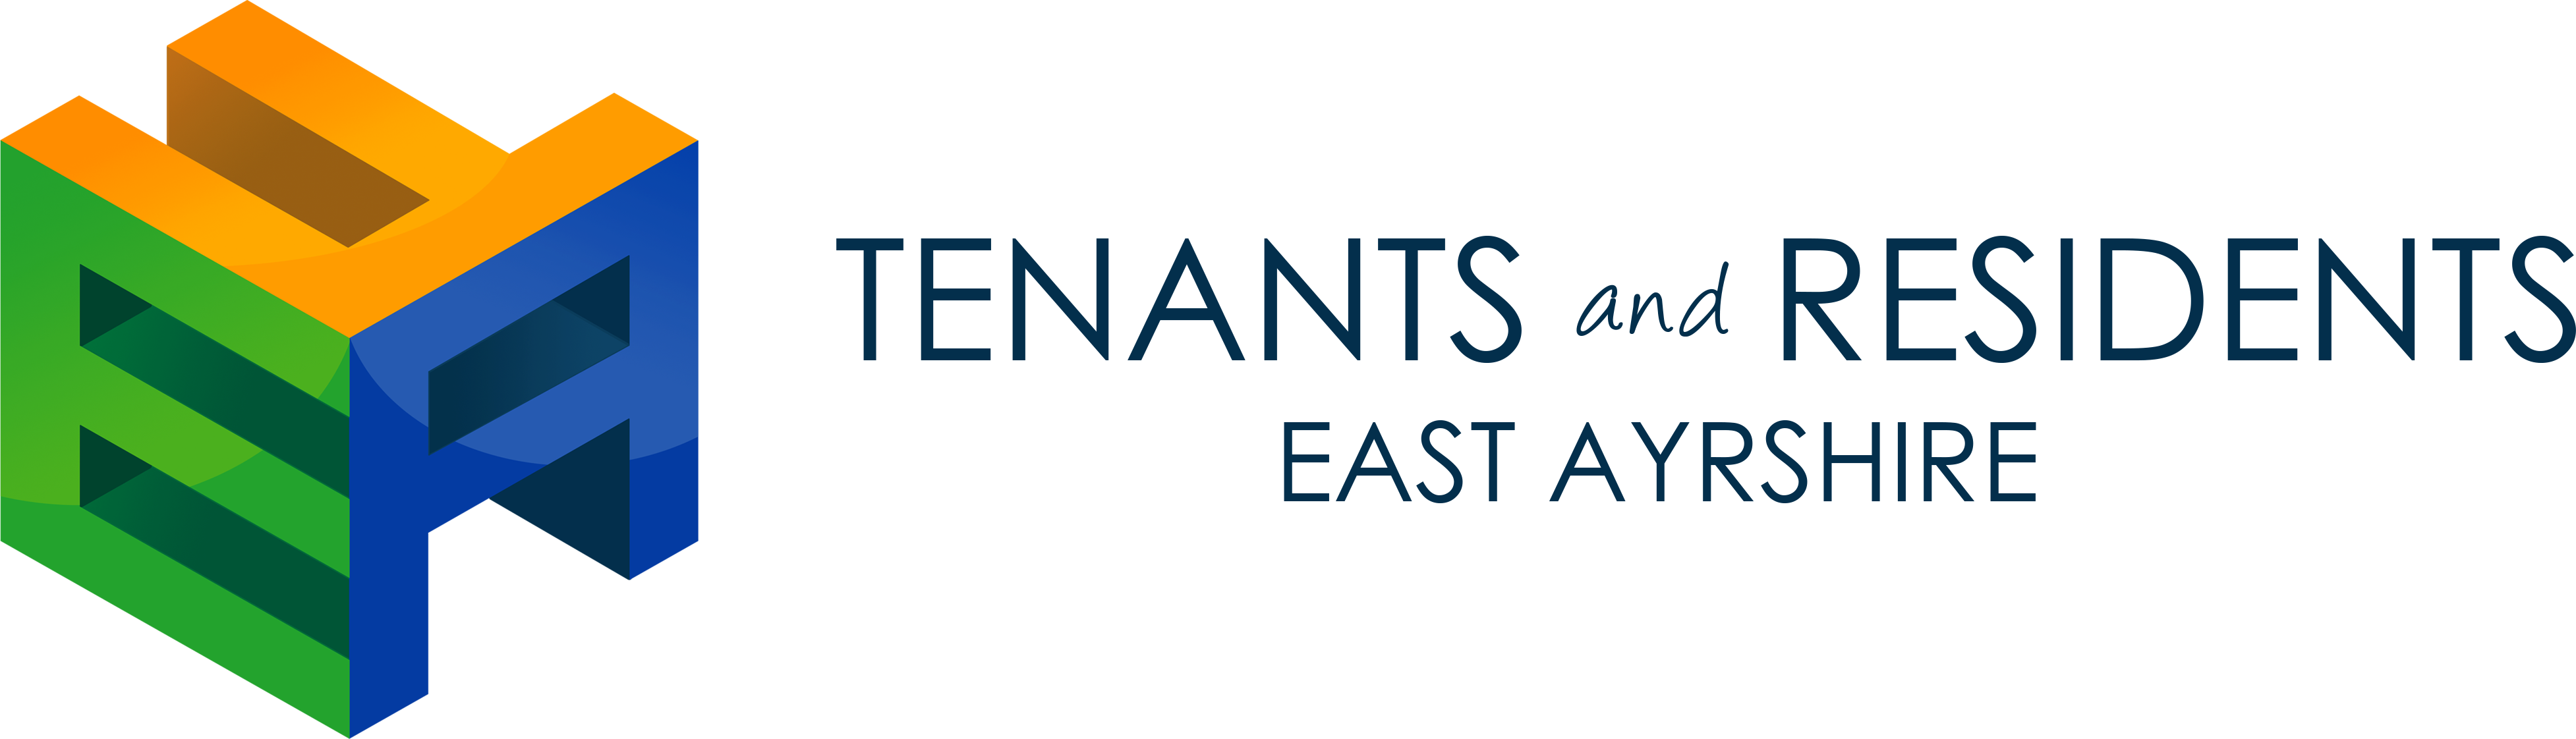 East Ayrshire  Federation of Tenants and Residents